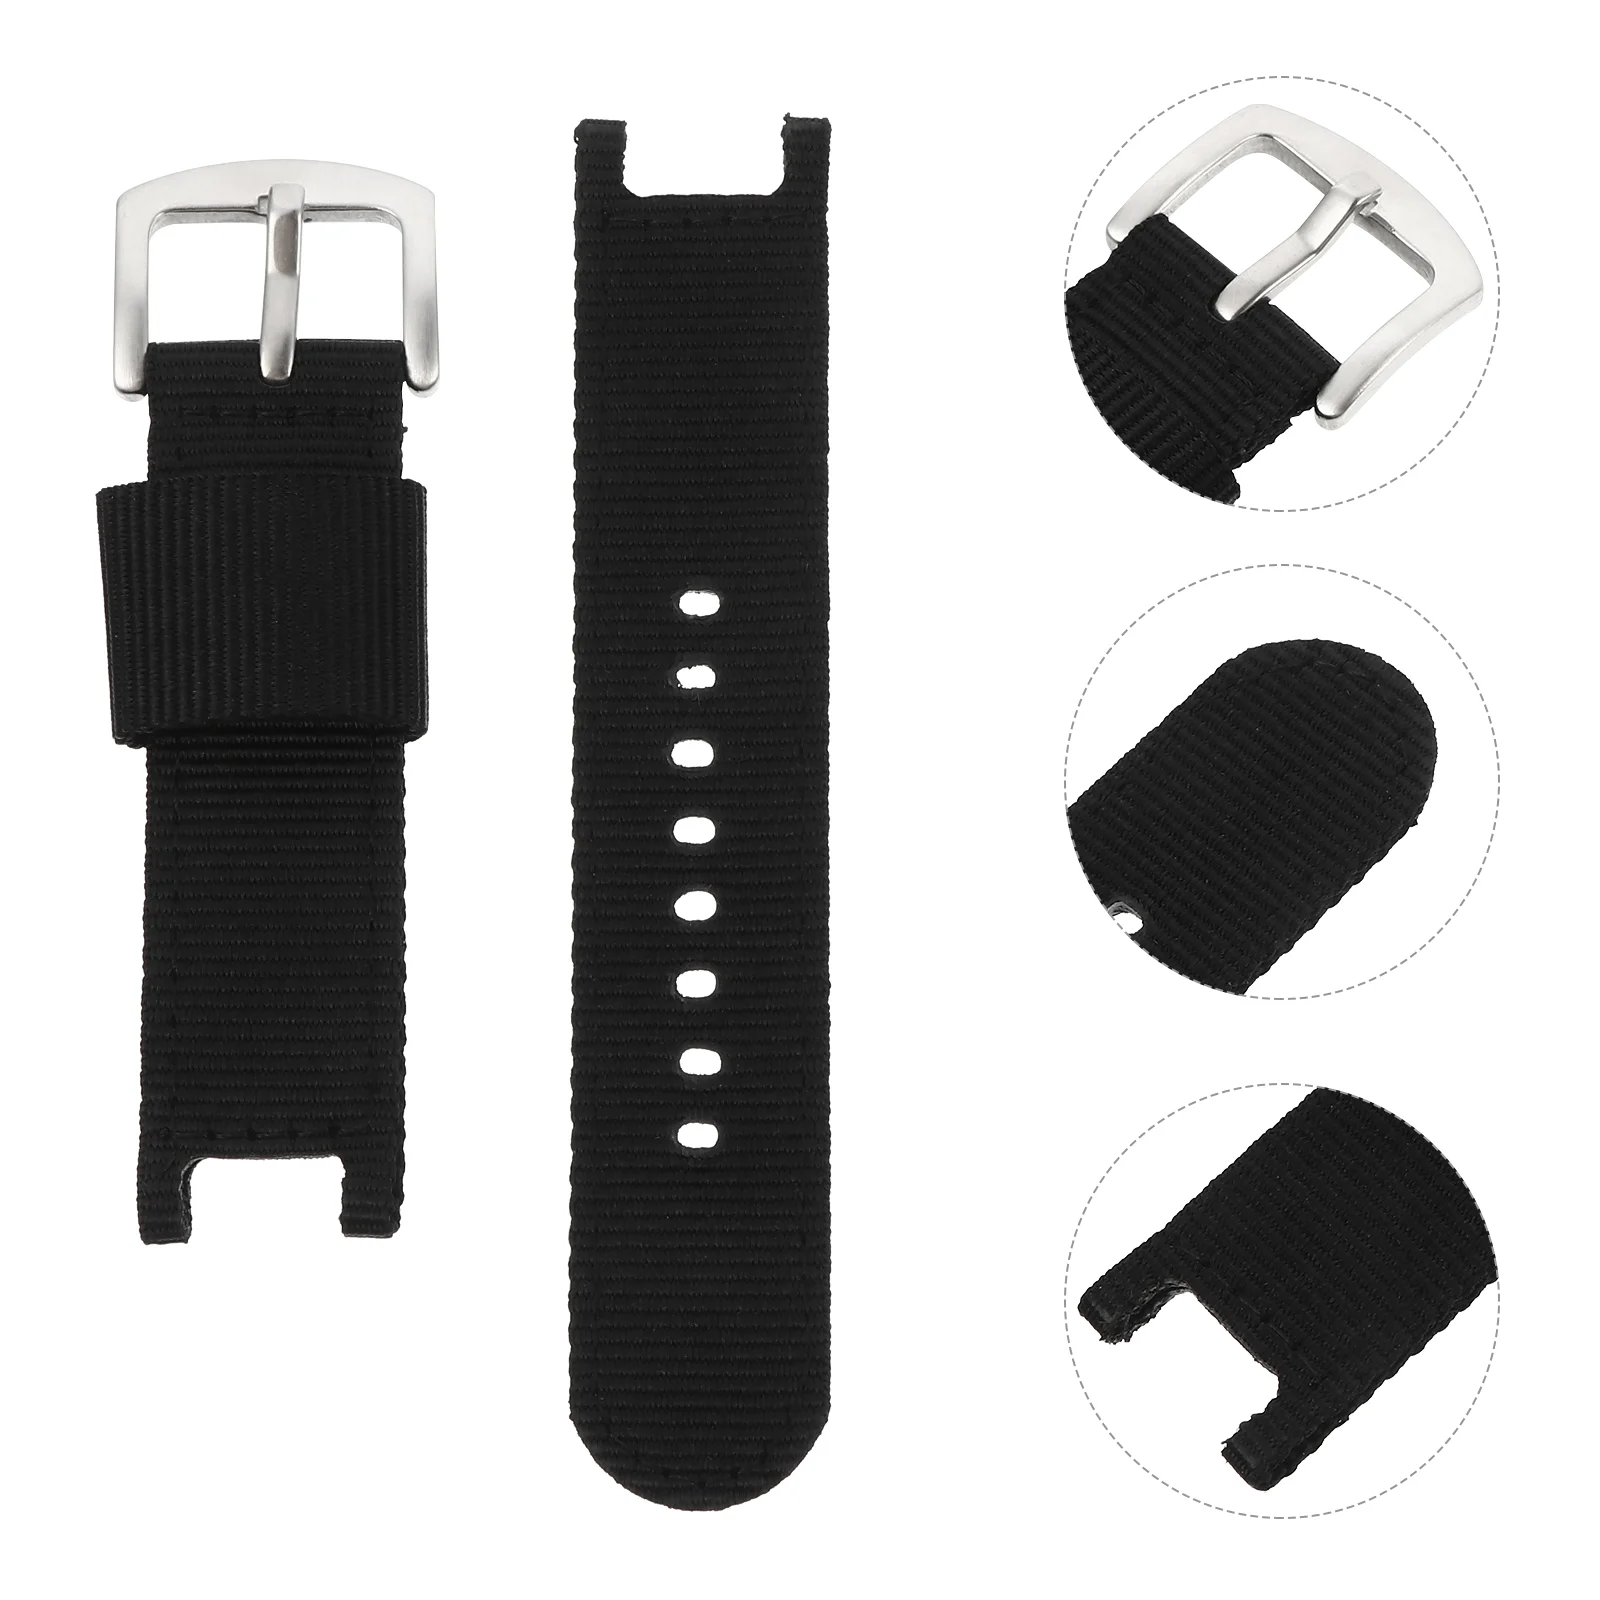 

Watch Strap Watchband Nylon Bands Band Rex Men T A1918 Wristband Man Replacement Wrist Accessories 22Mm Set Replacing S Style